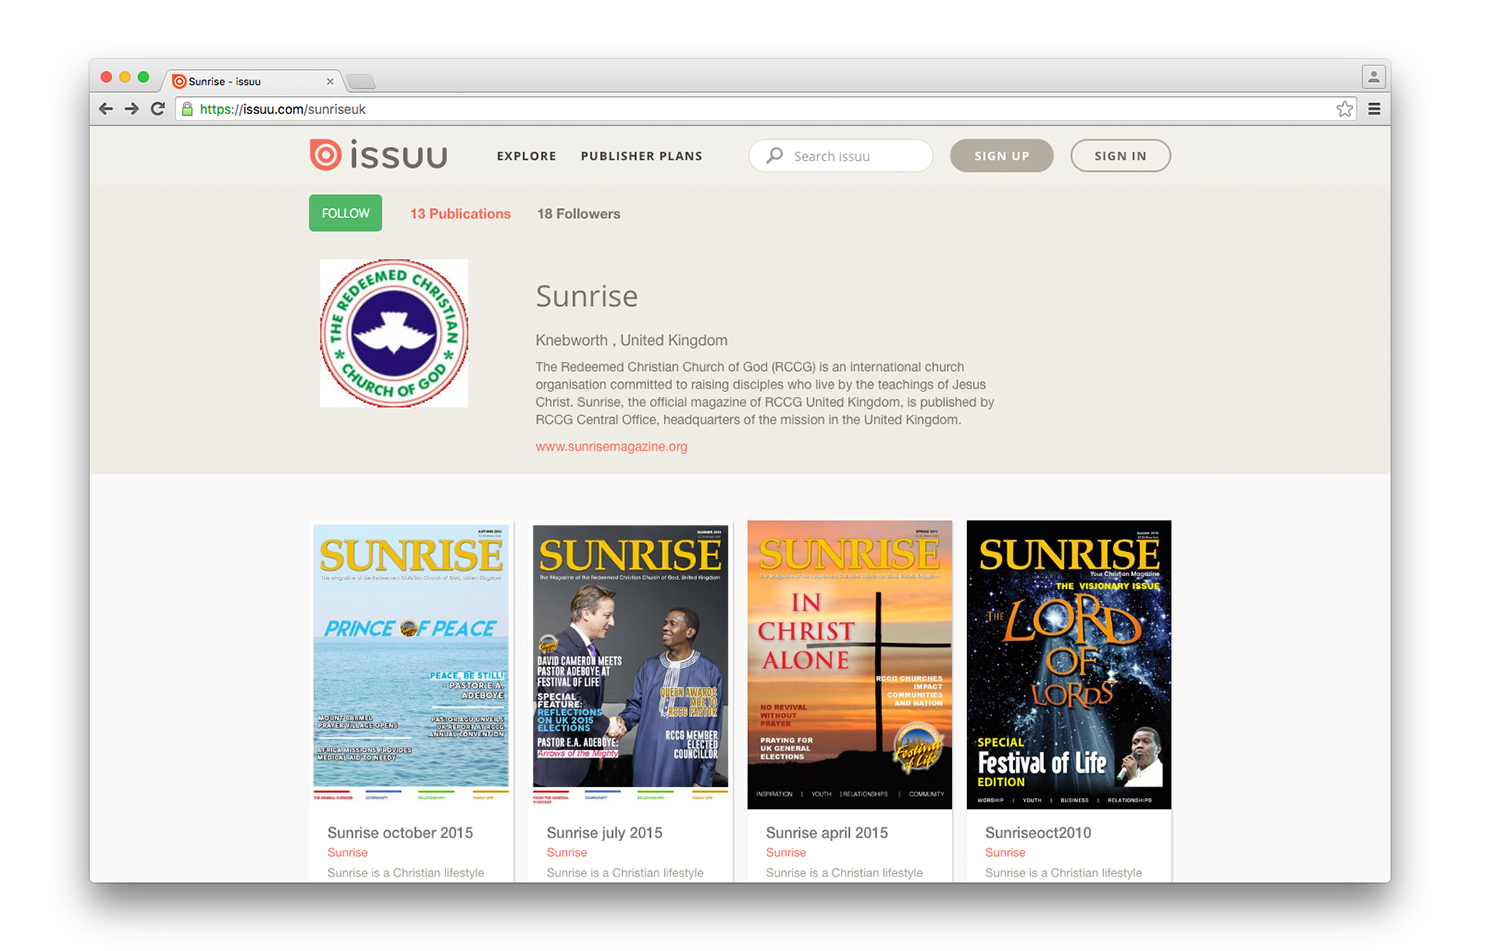 <h5>Signup to Sunrise Digital</h5>

<p>The Redeemed Christian Church of God (RCCG) is an international church organisation committed to raising disciples who live by the teachings of Jesus Christ. Sunrise, the official magazine of RCCG United Kingdom, is published by RCCG Central Office, headquarters of the mission in the United Kingdom.</p>